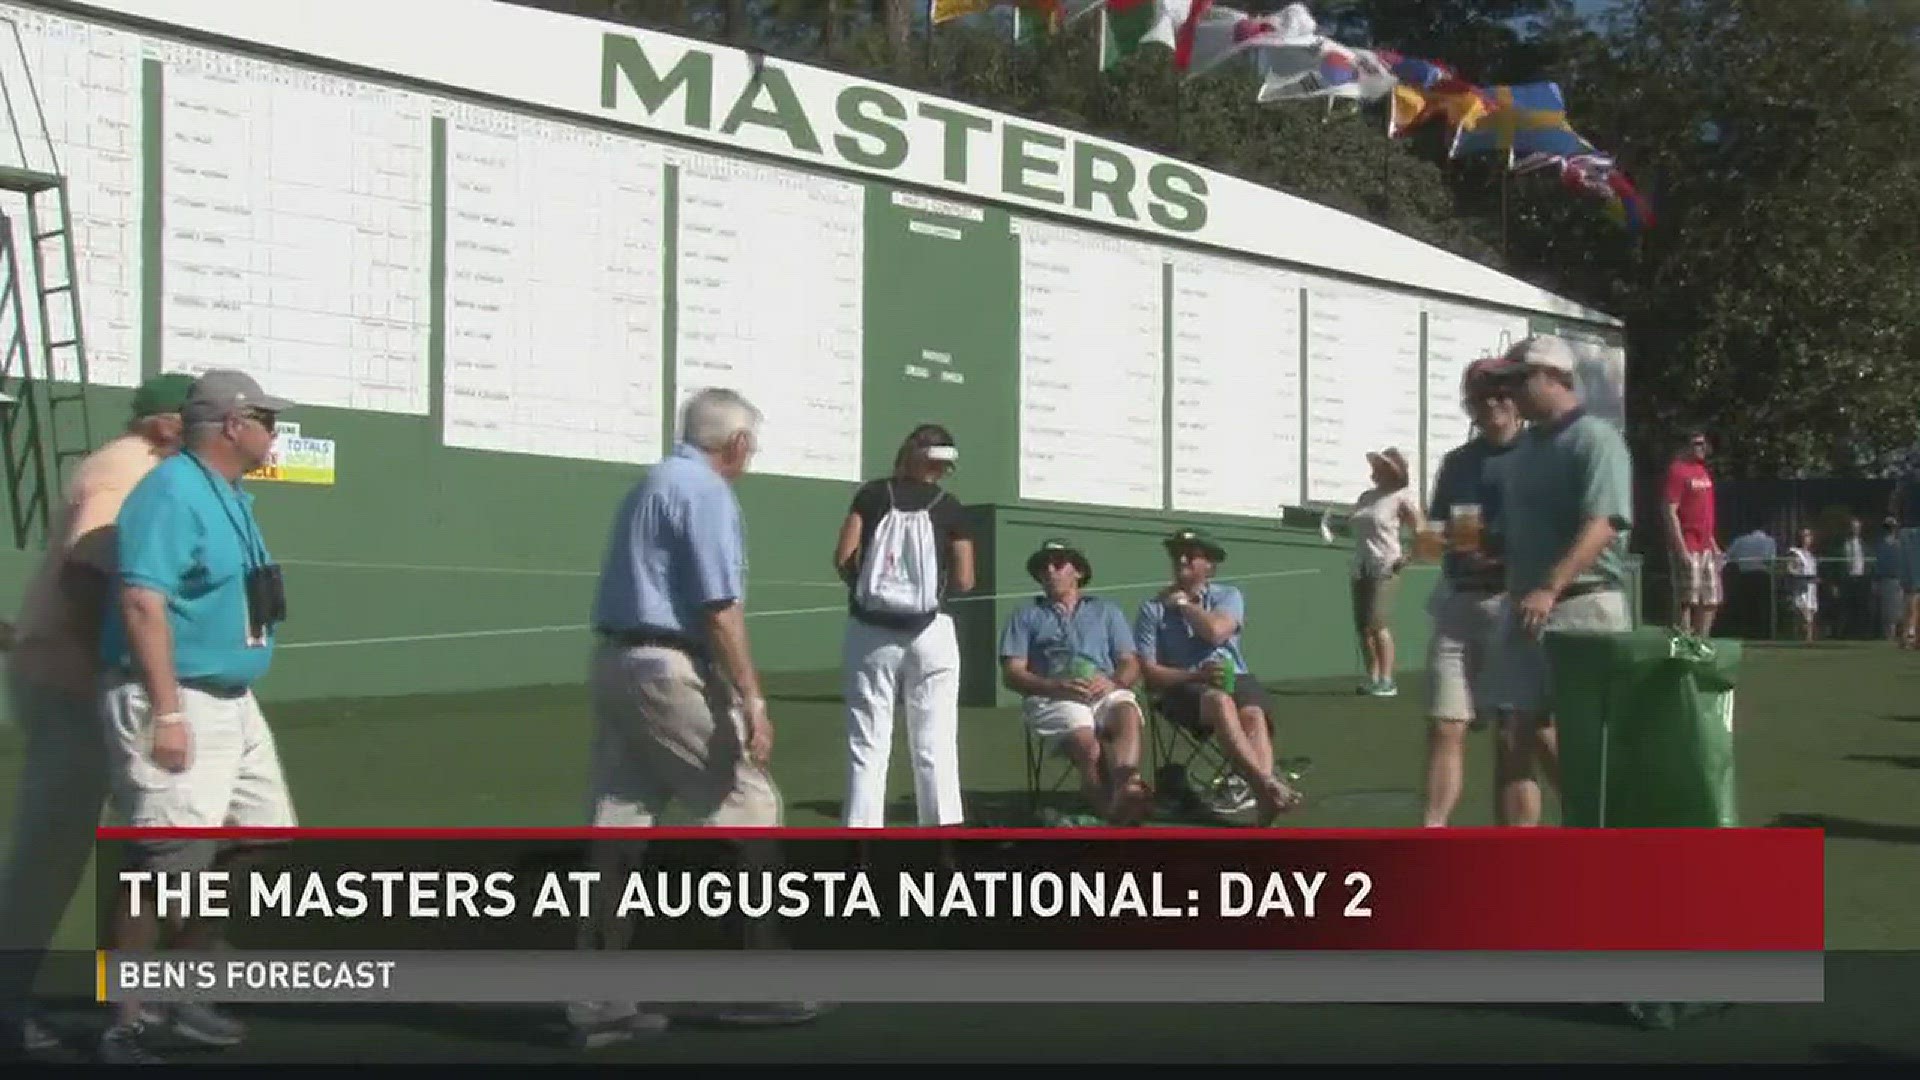 The Masters at Augusta National: Day 2